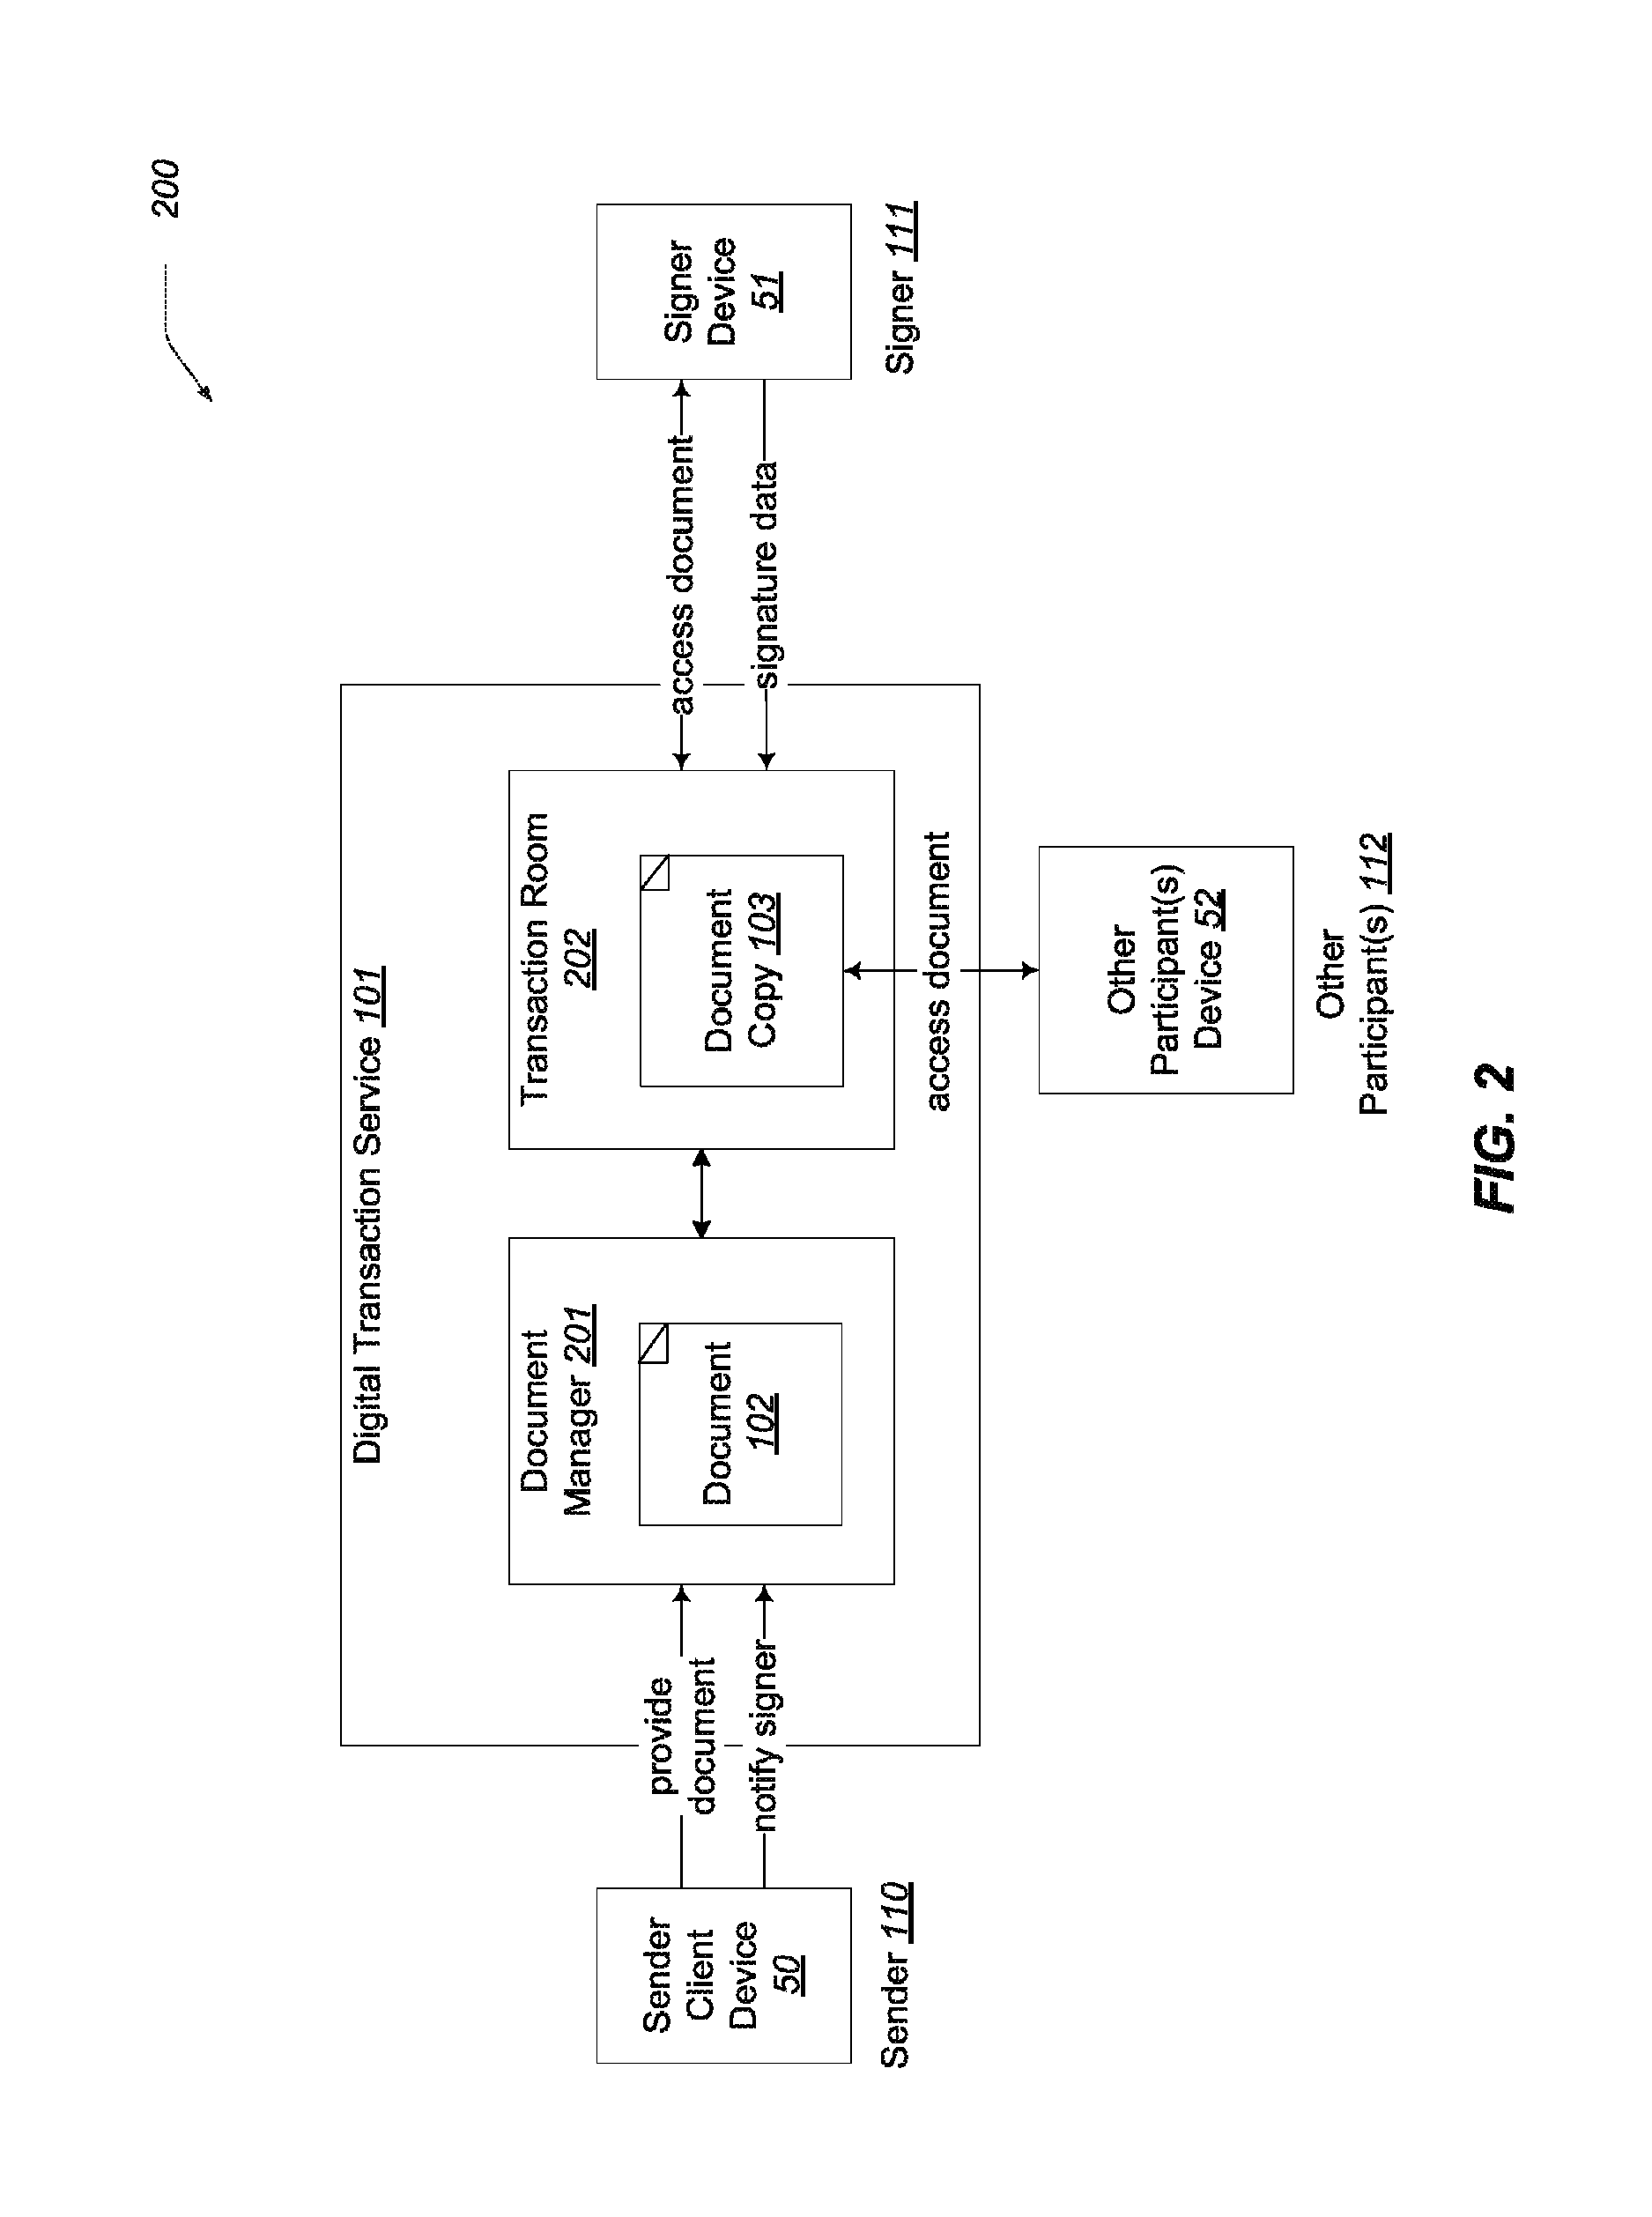 Systems and methods for employing document snapshots in transaction rooms for digital transactions